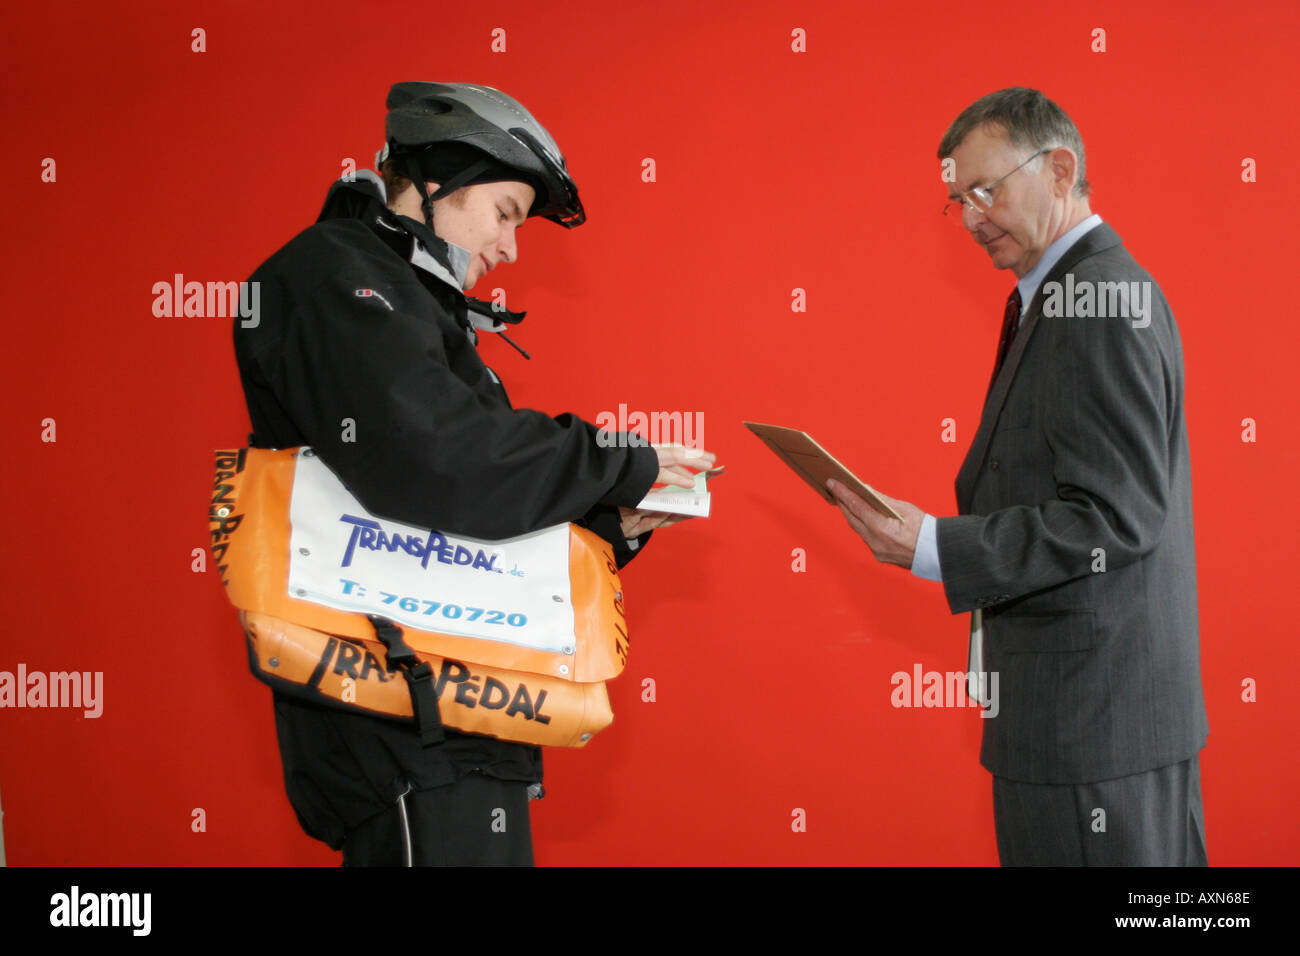 bike messenger in Munich Germany handing over letter to business man property release for bag and model Releases are available Stock Photo